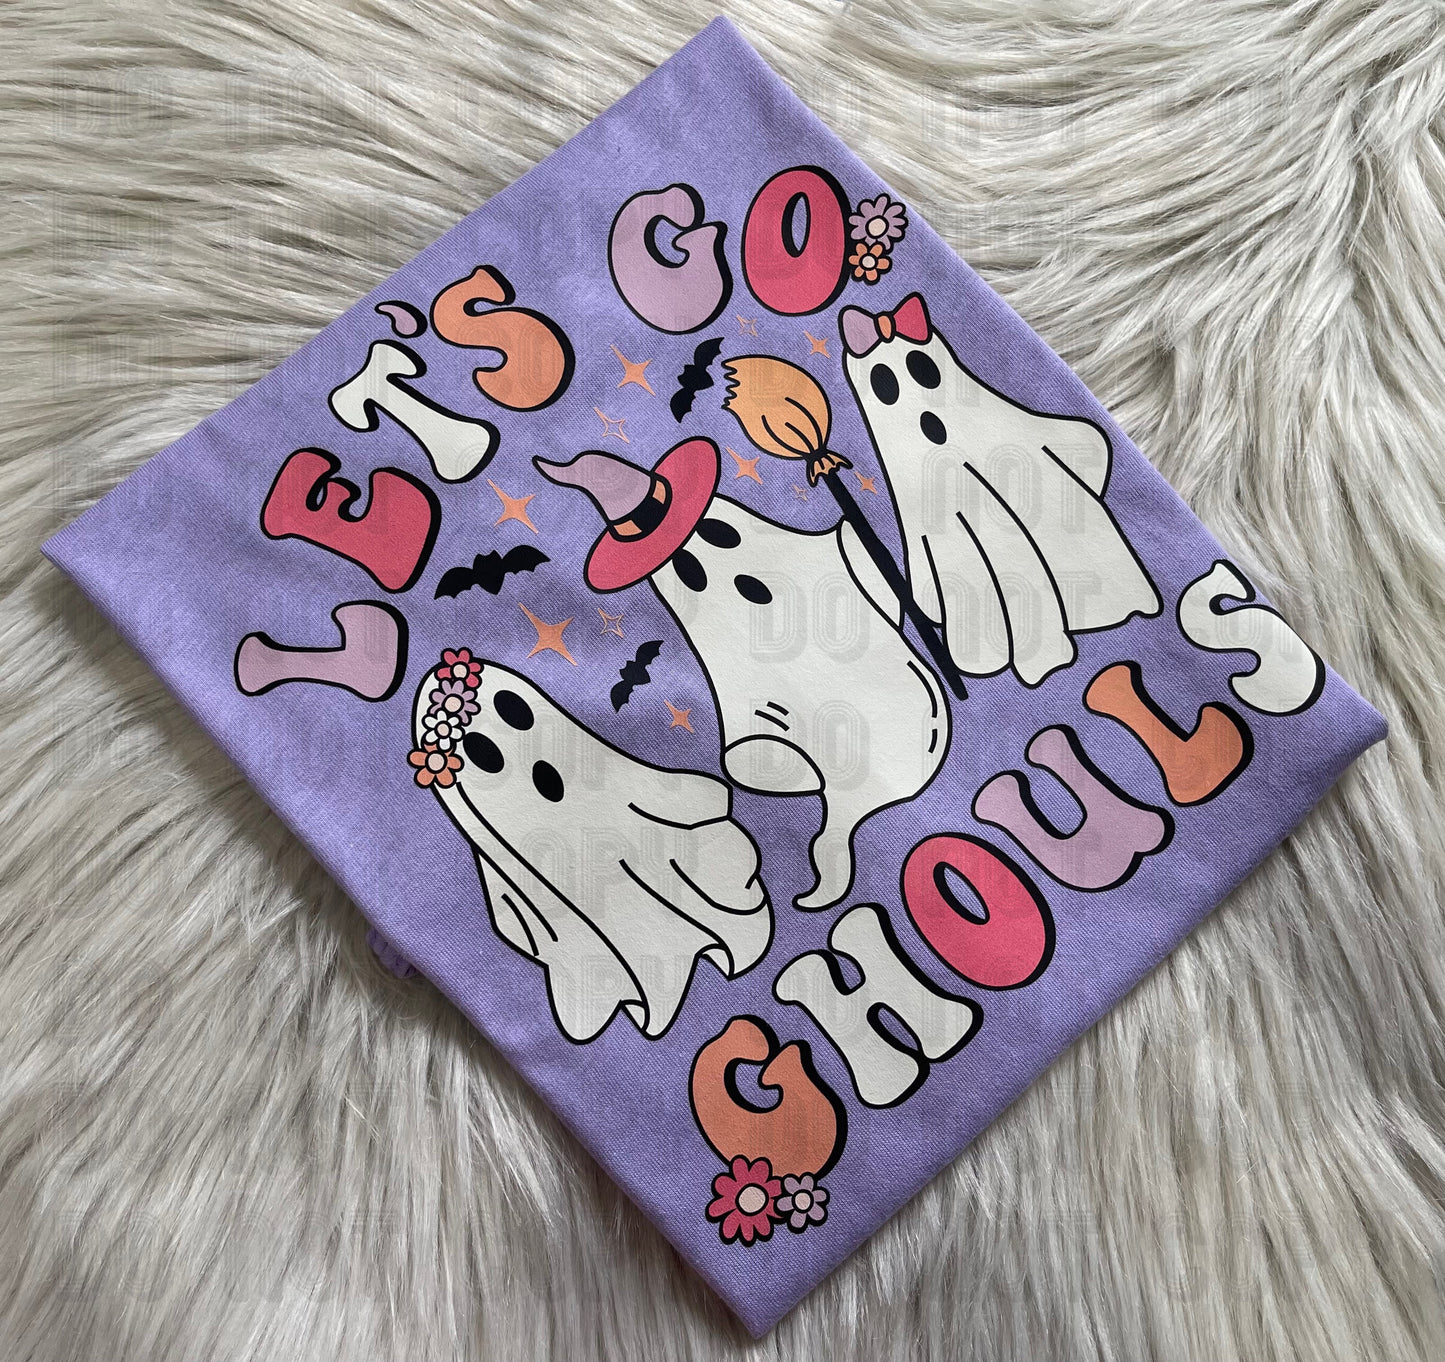 Let's go ghouls ghost trio -Youth tee